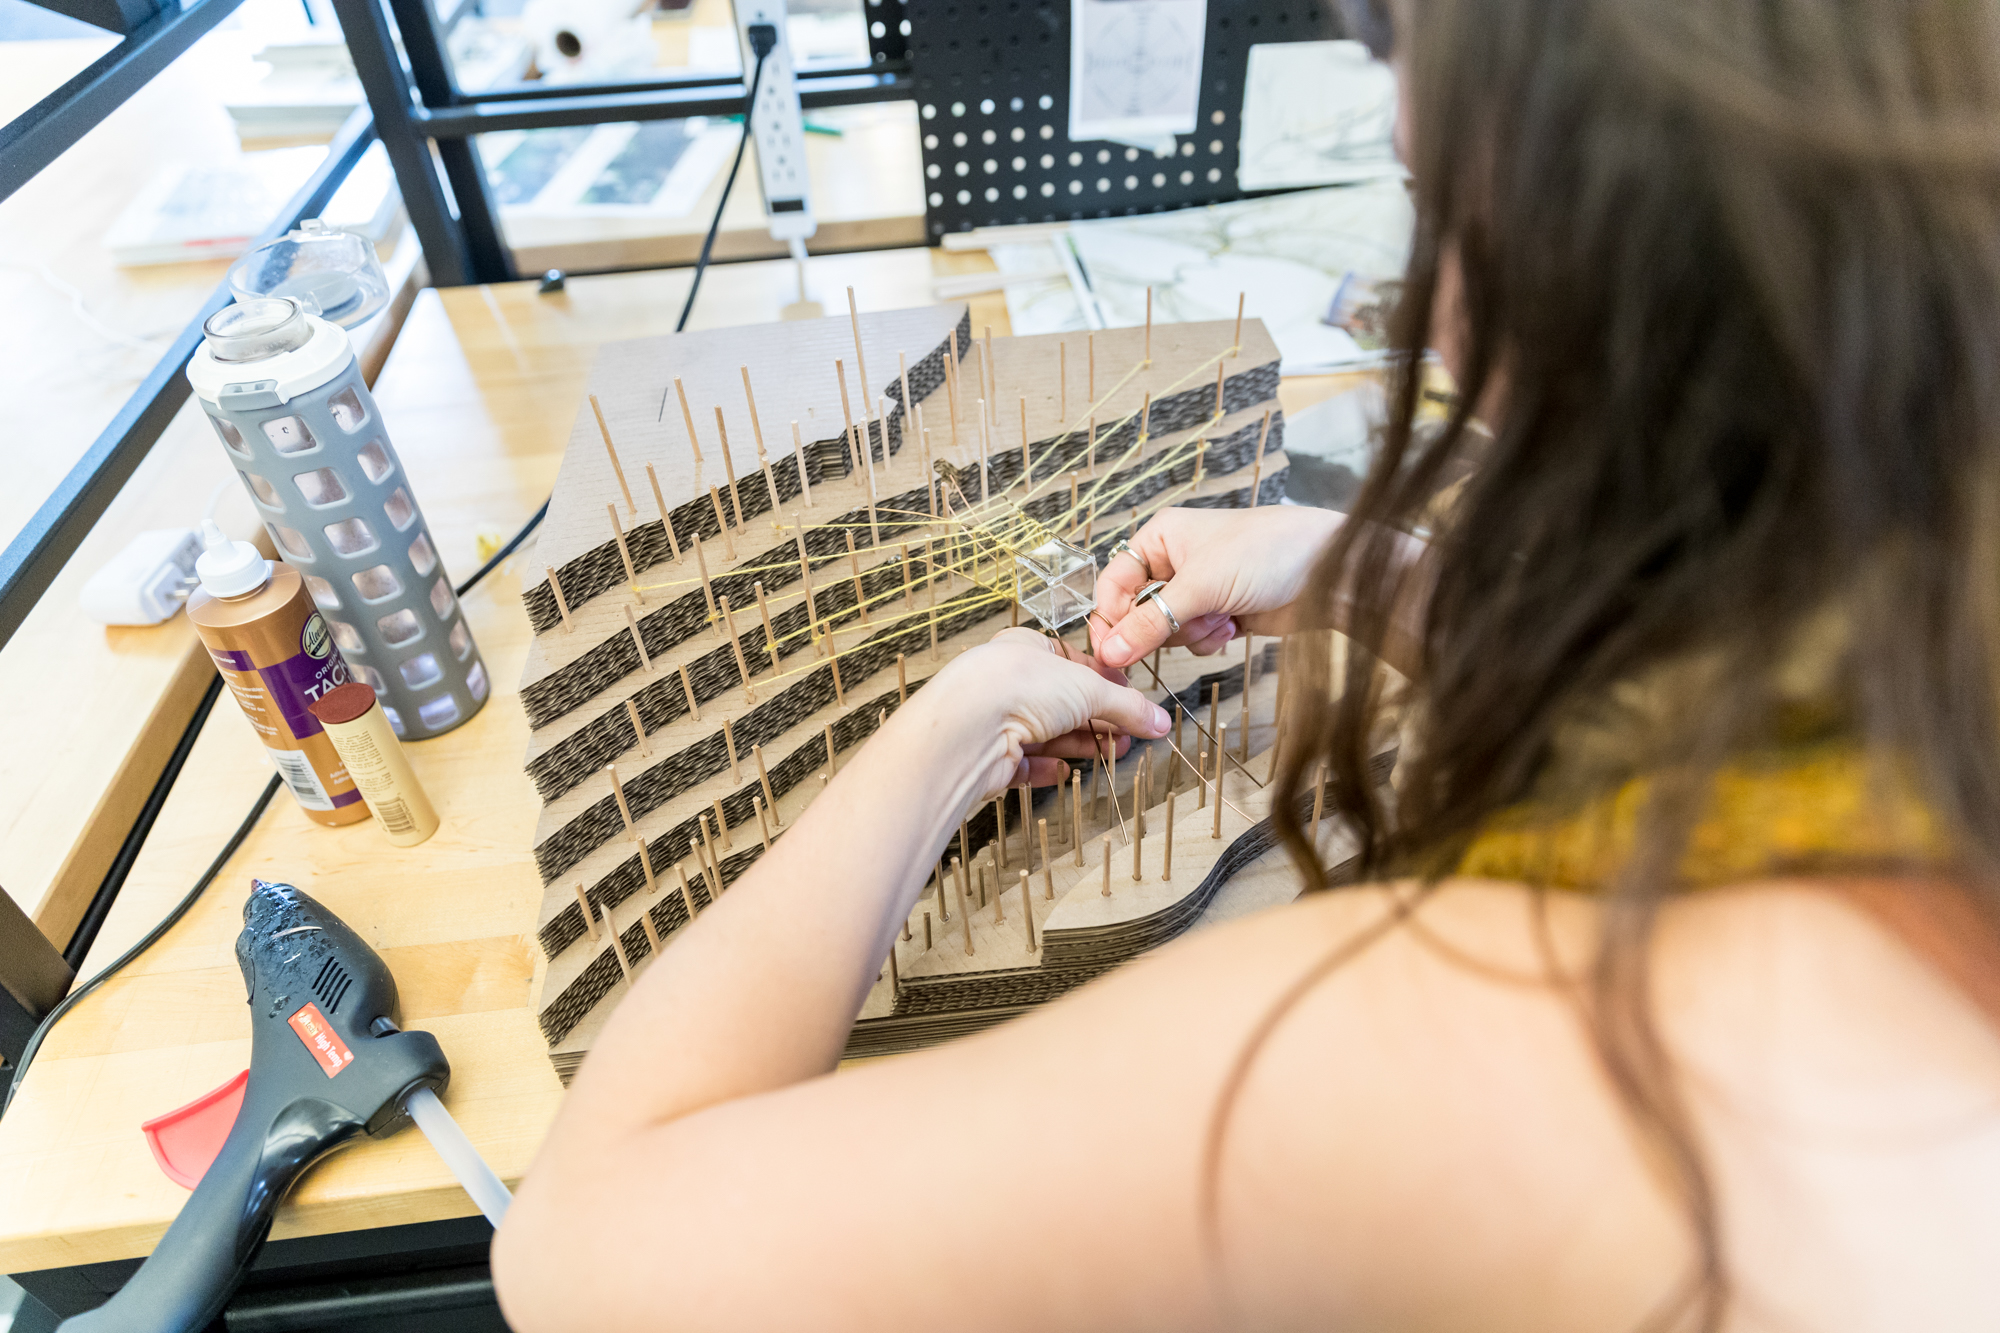 Landscape architecture student working on a model in the studio